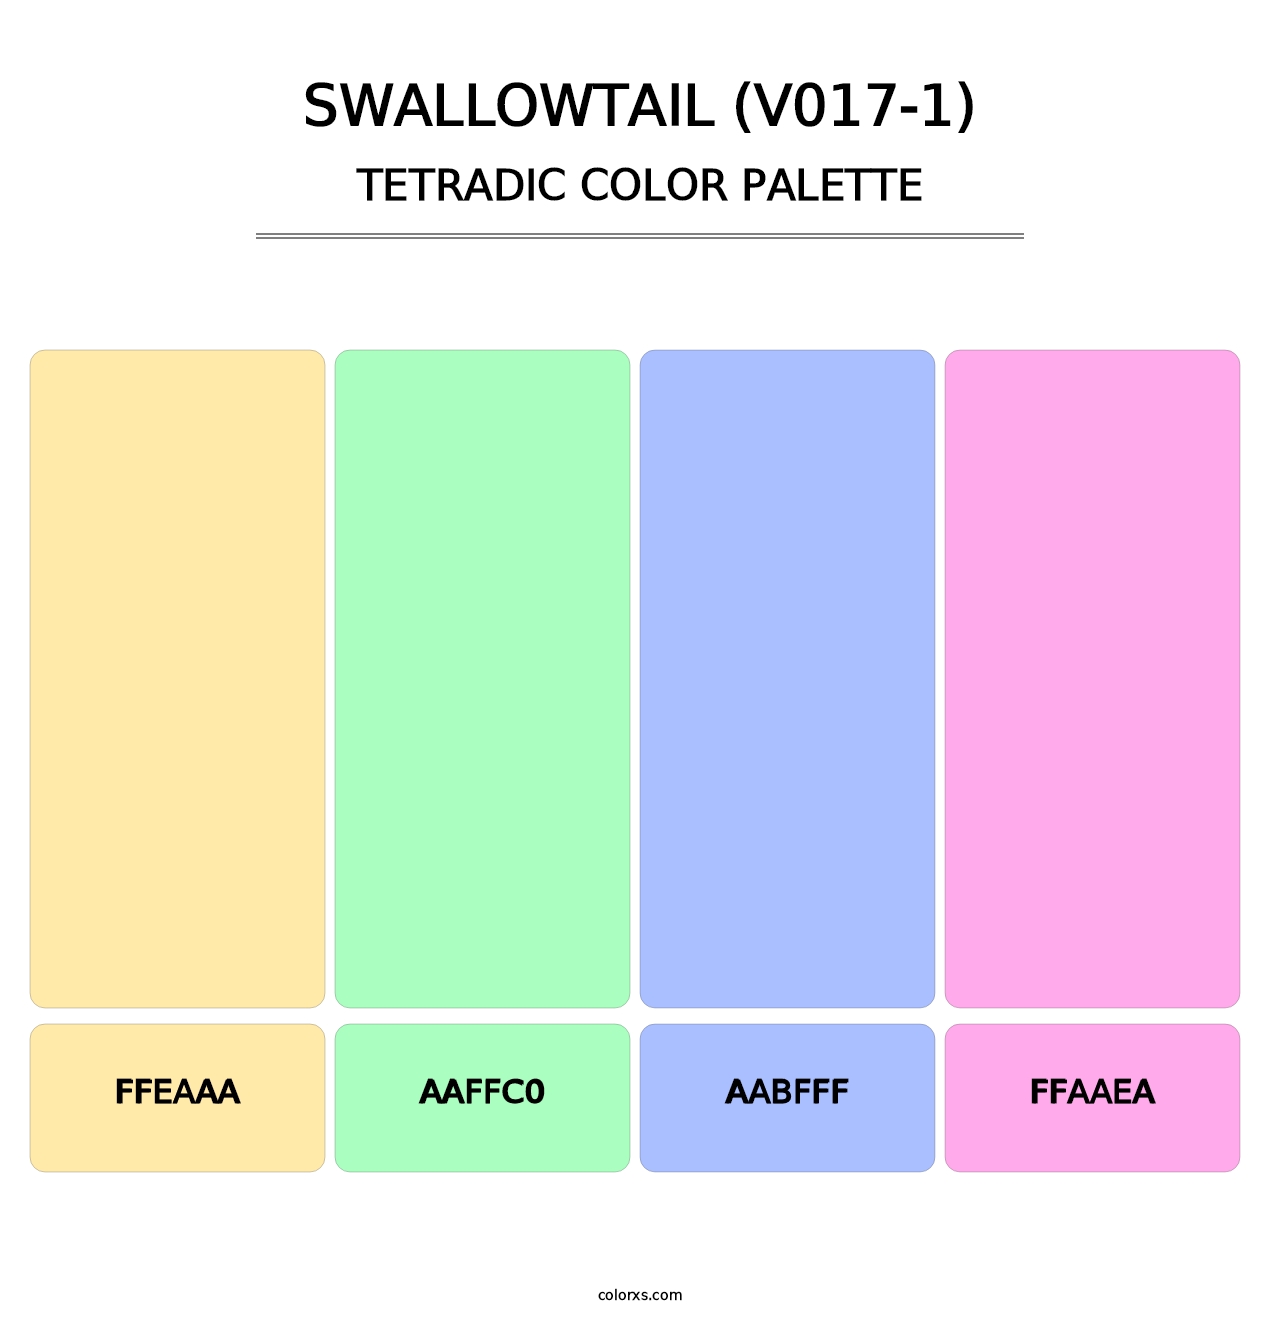 Swallowtail (V017-1) - Tetradic Color Palette